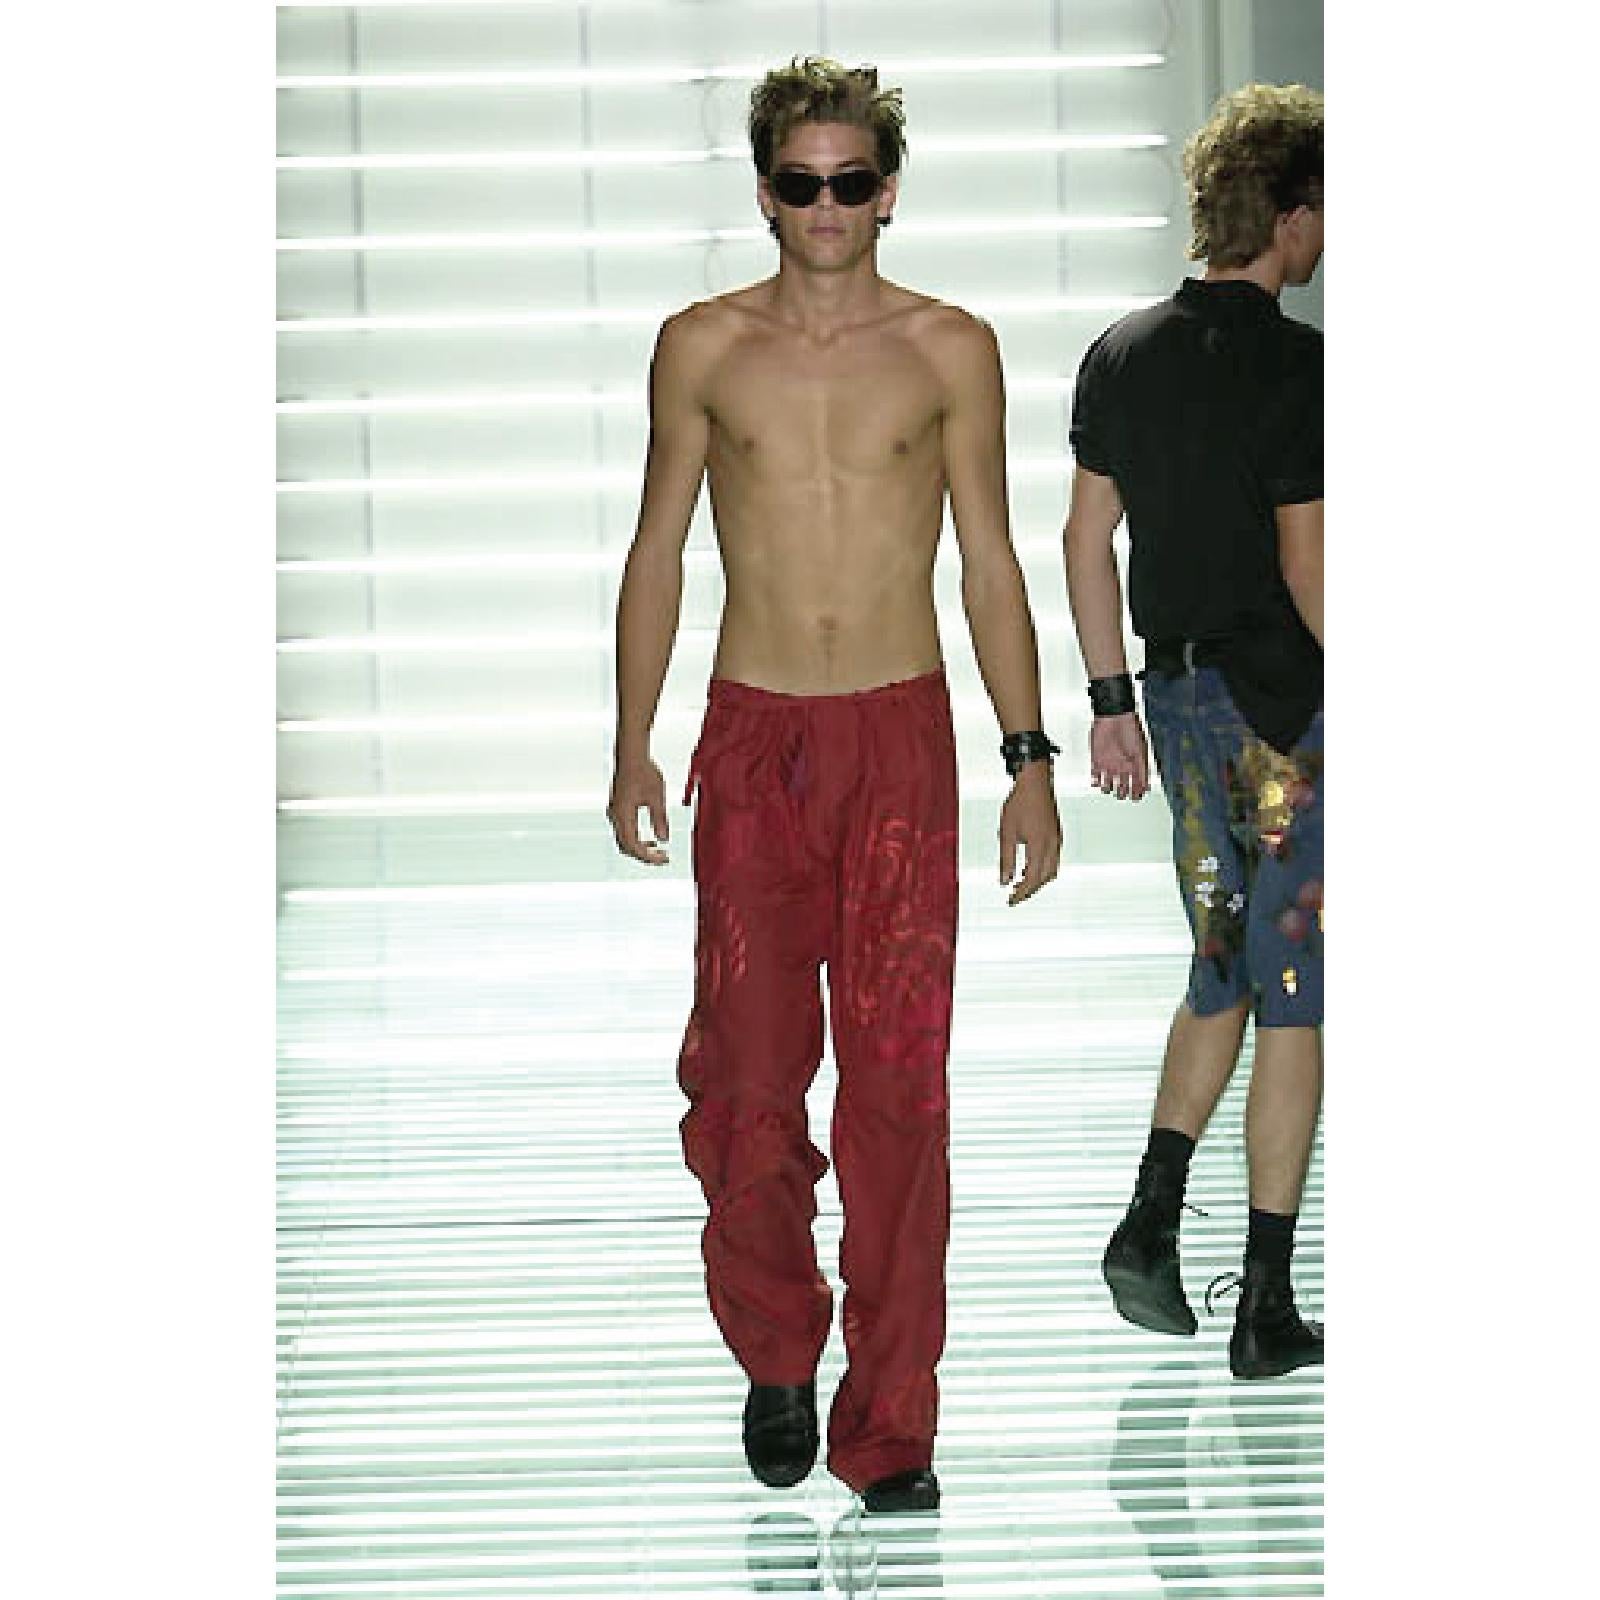 GUCCI by TOM FORD Spring Summer 2001 Collection karate style pants come in red silk with dragon embroidery throughout, button fly, tied drawstring waistband, and quilted hem. Wear . Made in Italy.
 
Gently Loved, Good Pre-Owned Condition.
Marked: IT